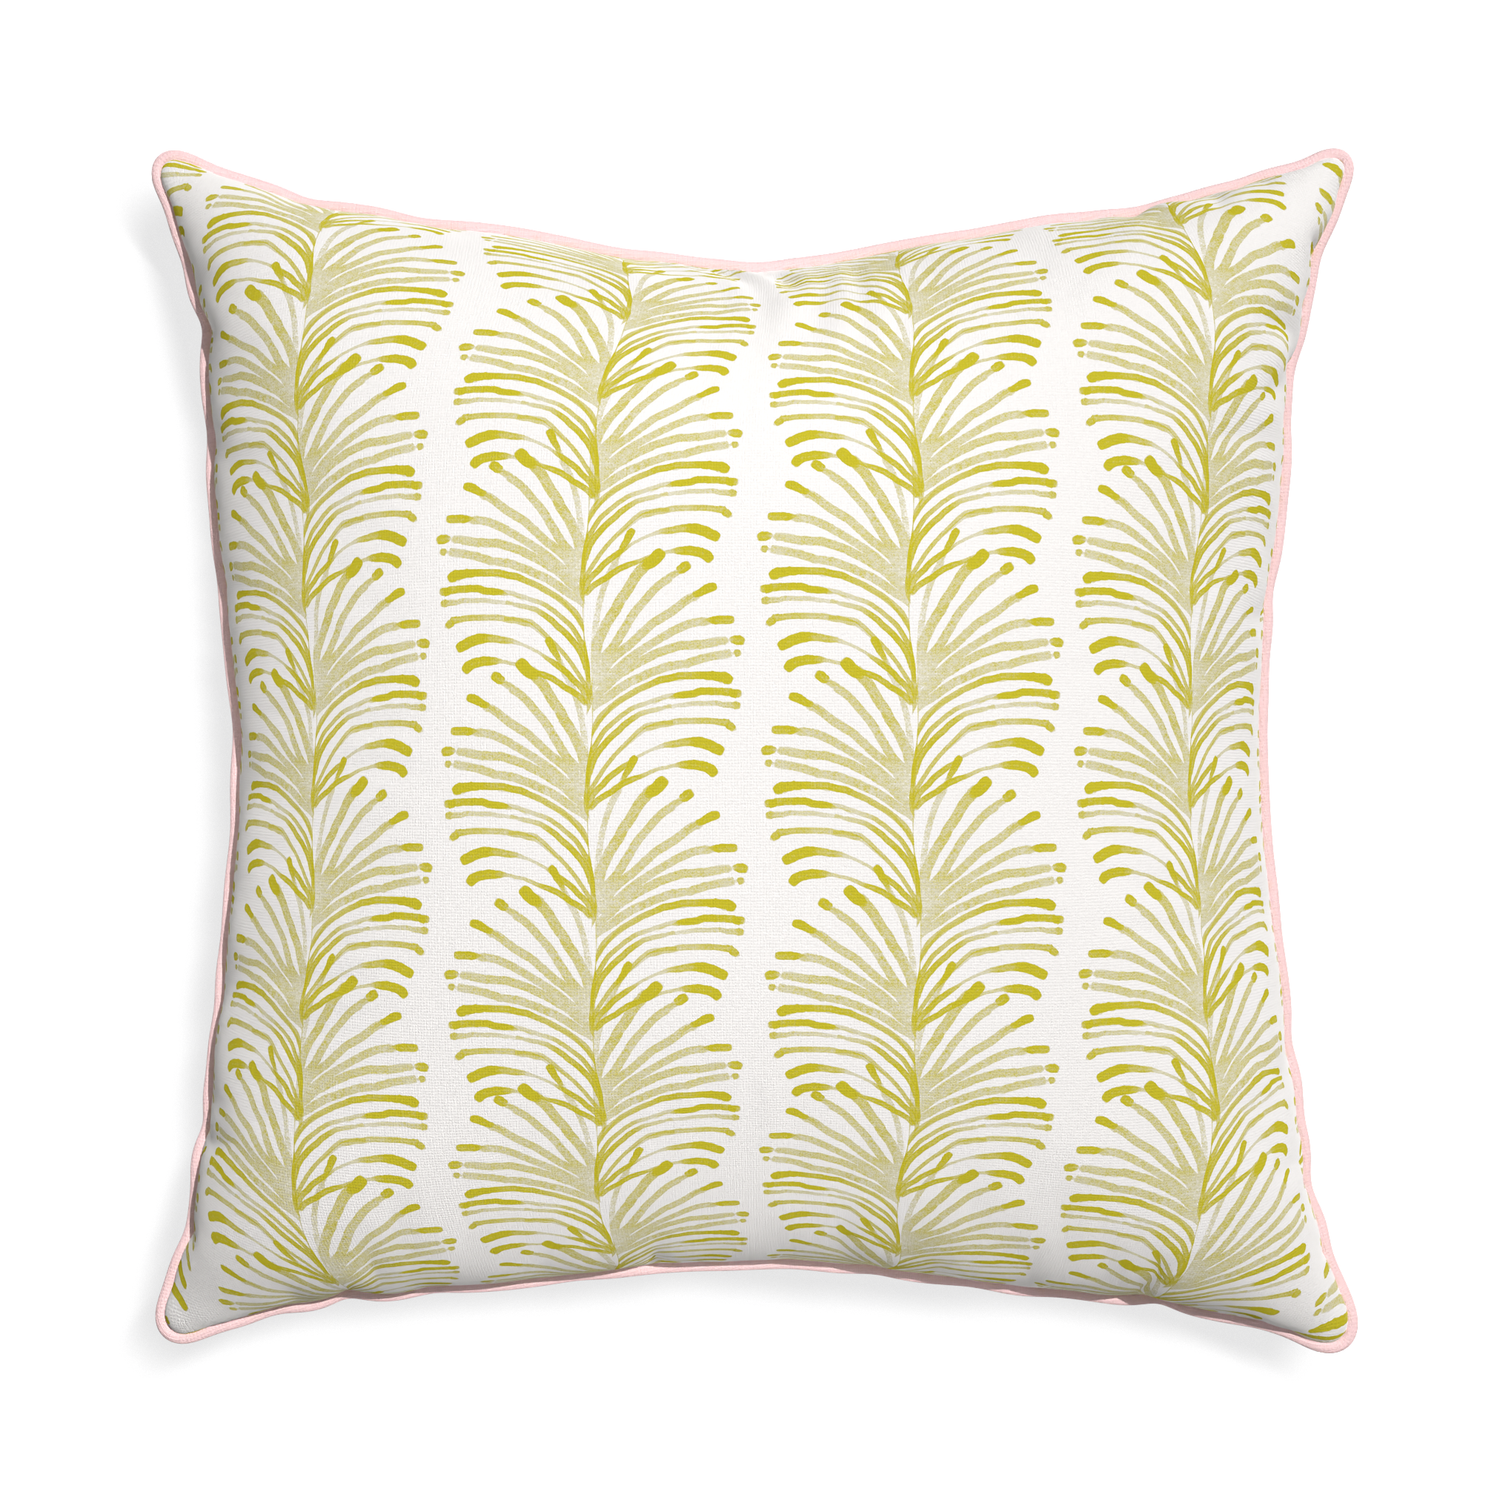 Euro-sham emma chartreuse custom yellow stripe chartreusepillow with petal piping on white background